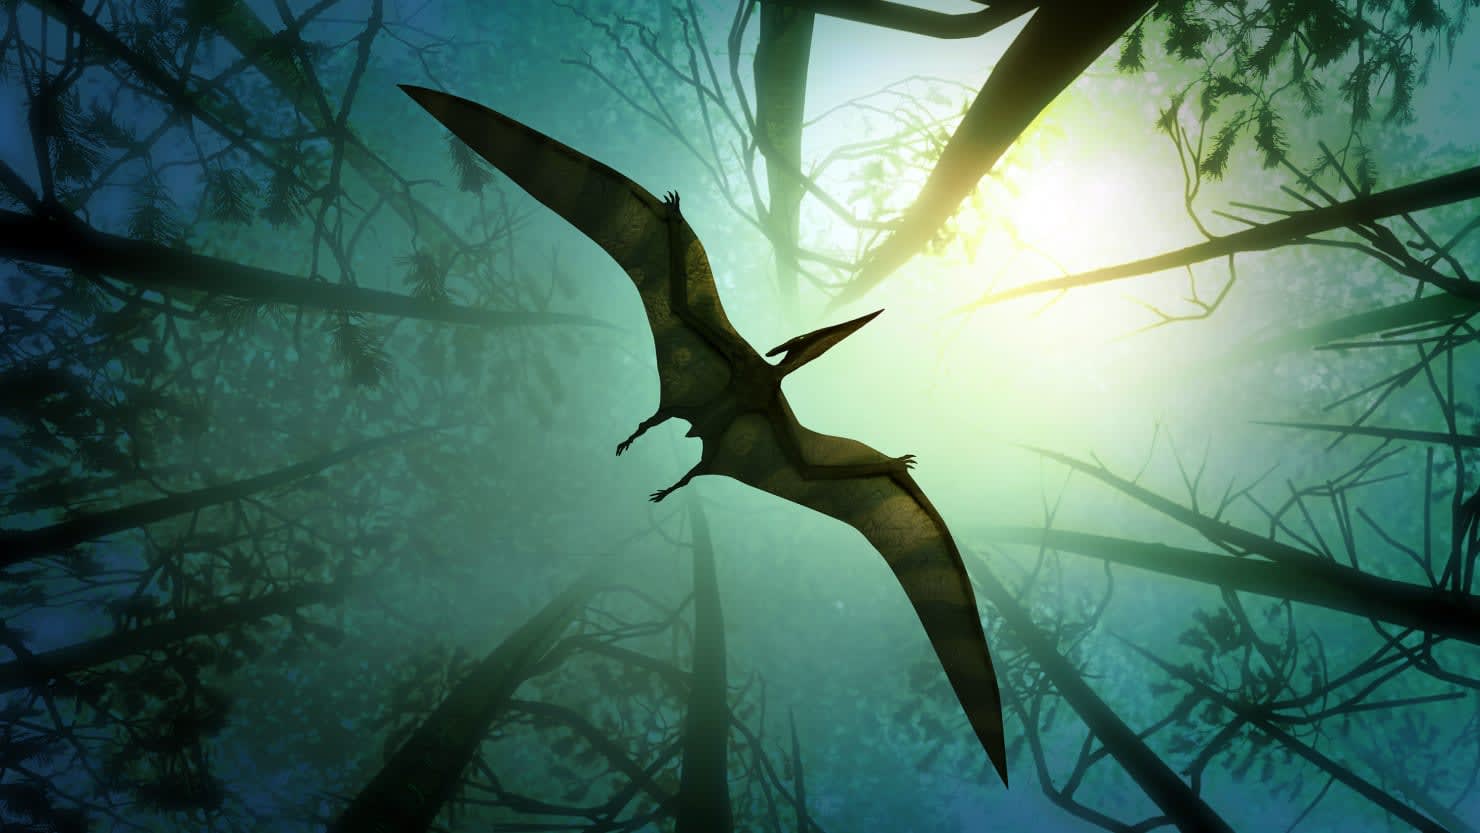 Hunting for Flying Dinosaurs in a Remote Corner of the World